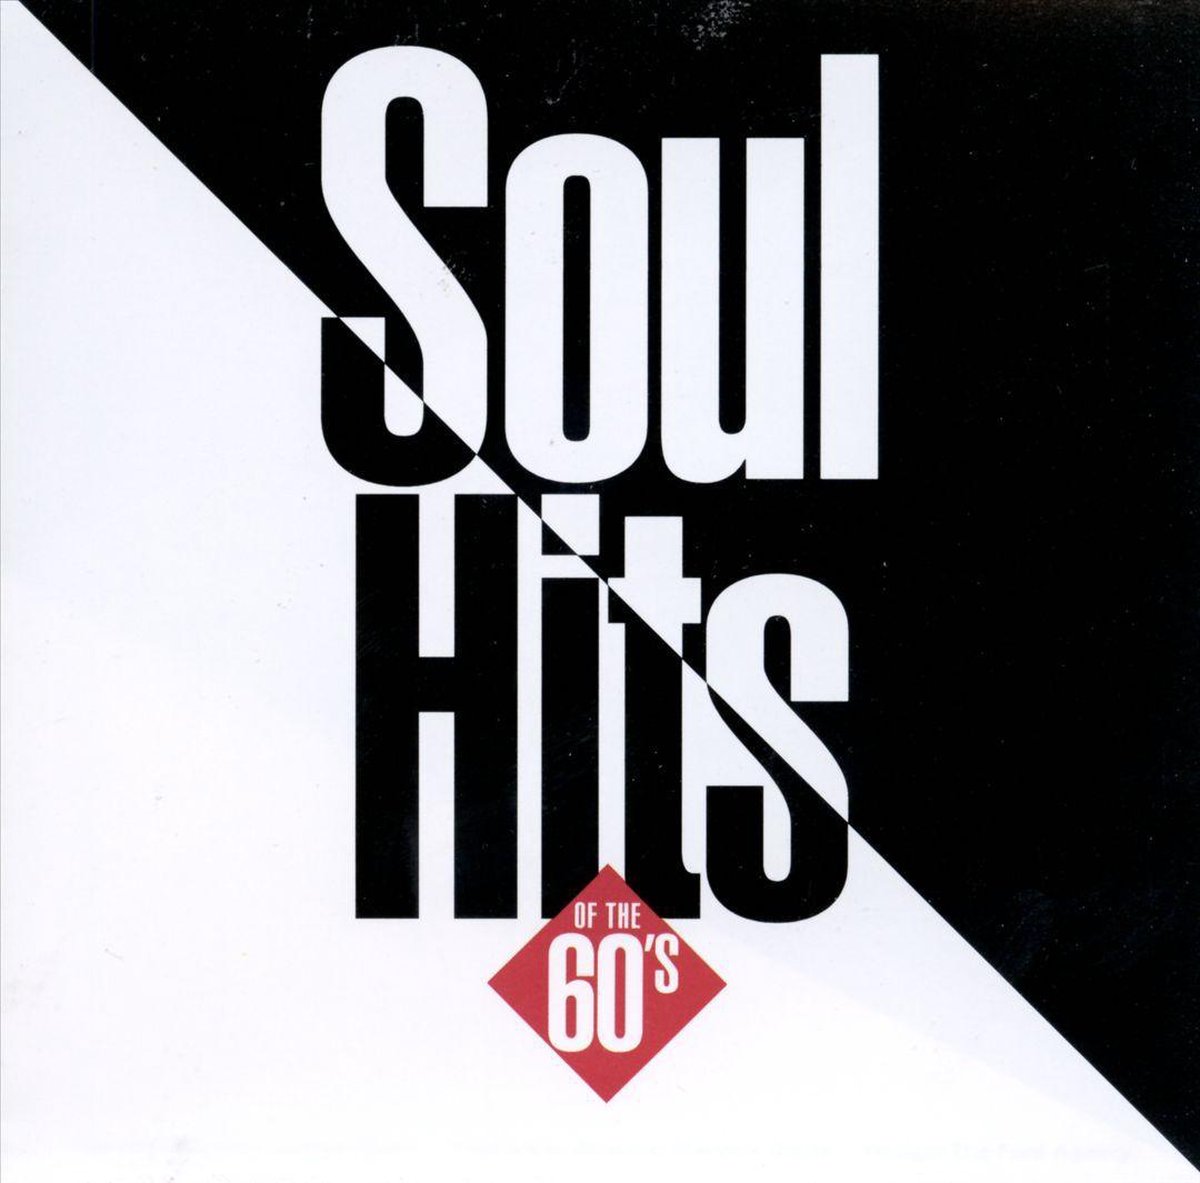 Soul Hits of the 60's [Polygram] - various artists